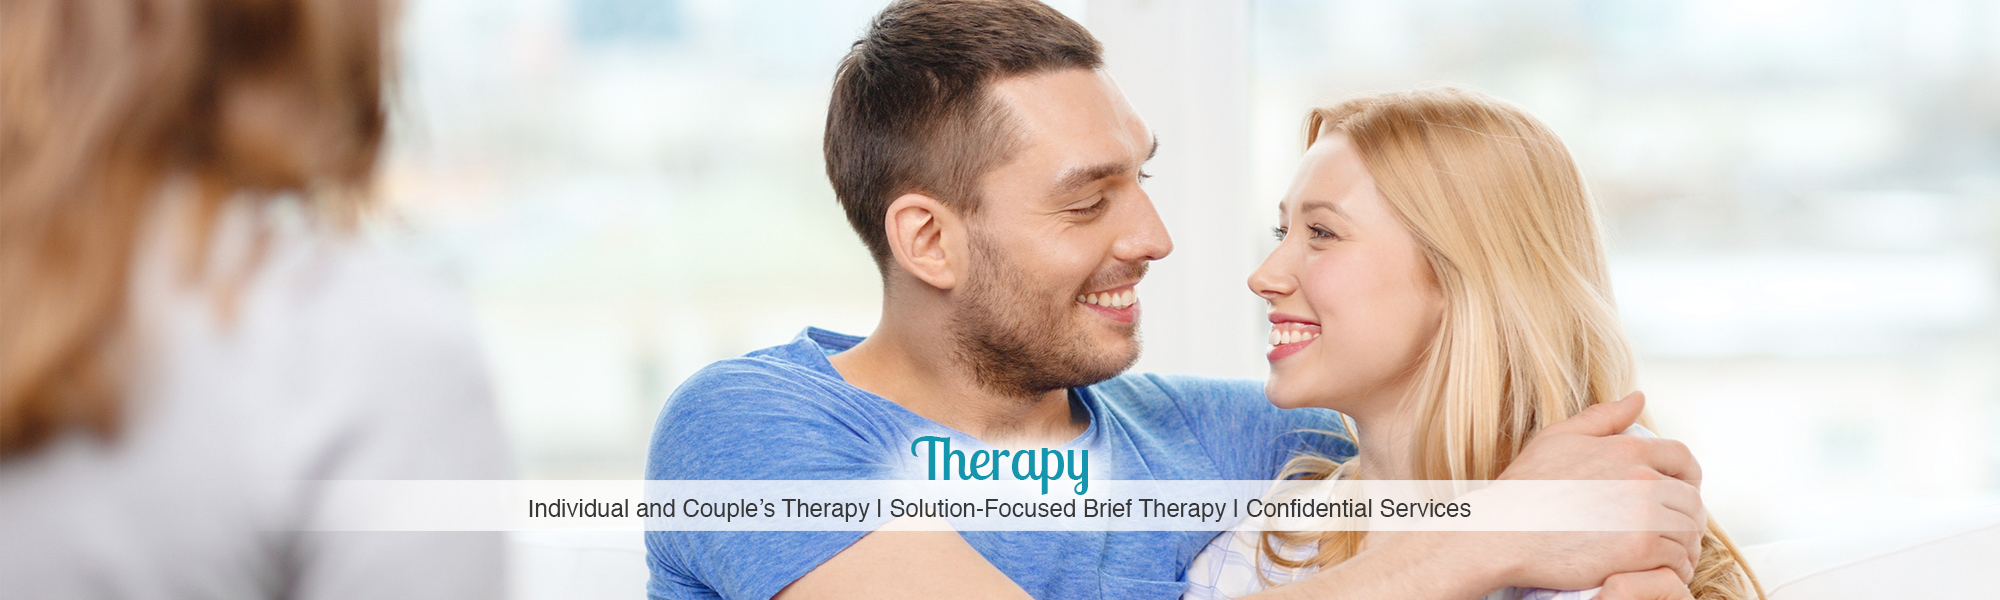 Therapy: Individual and Couple's Therapy | Solution-Focused Brief Therapy | Confidential Services